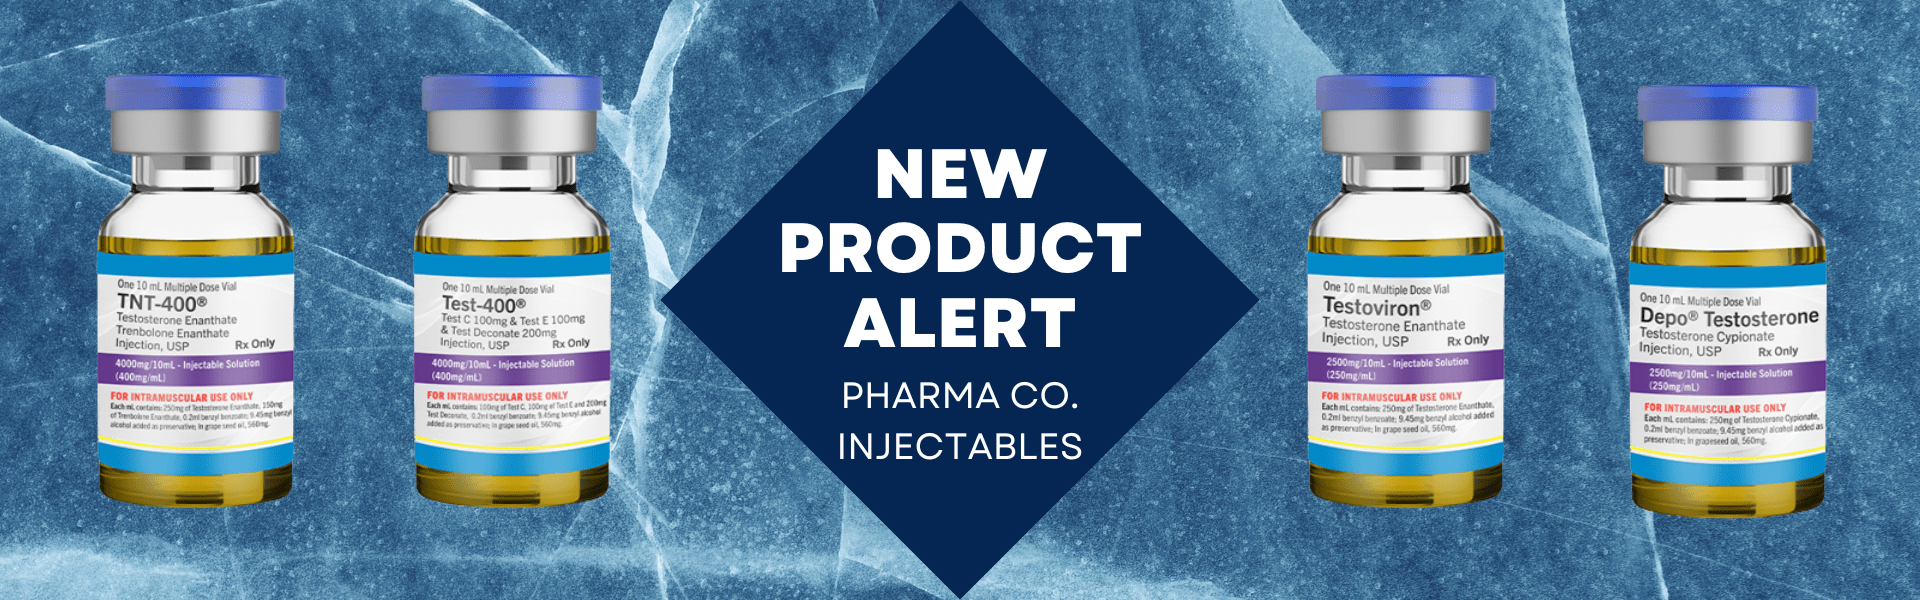 PHARMA CO. INJECTABLES